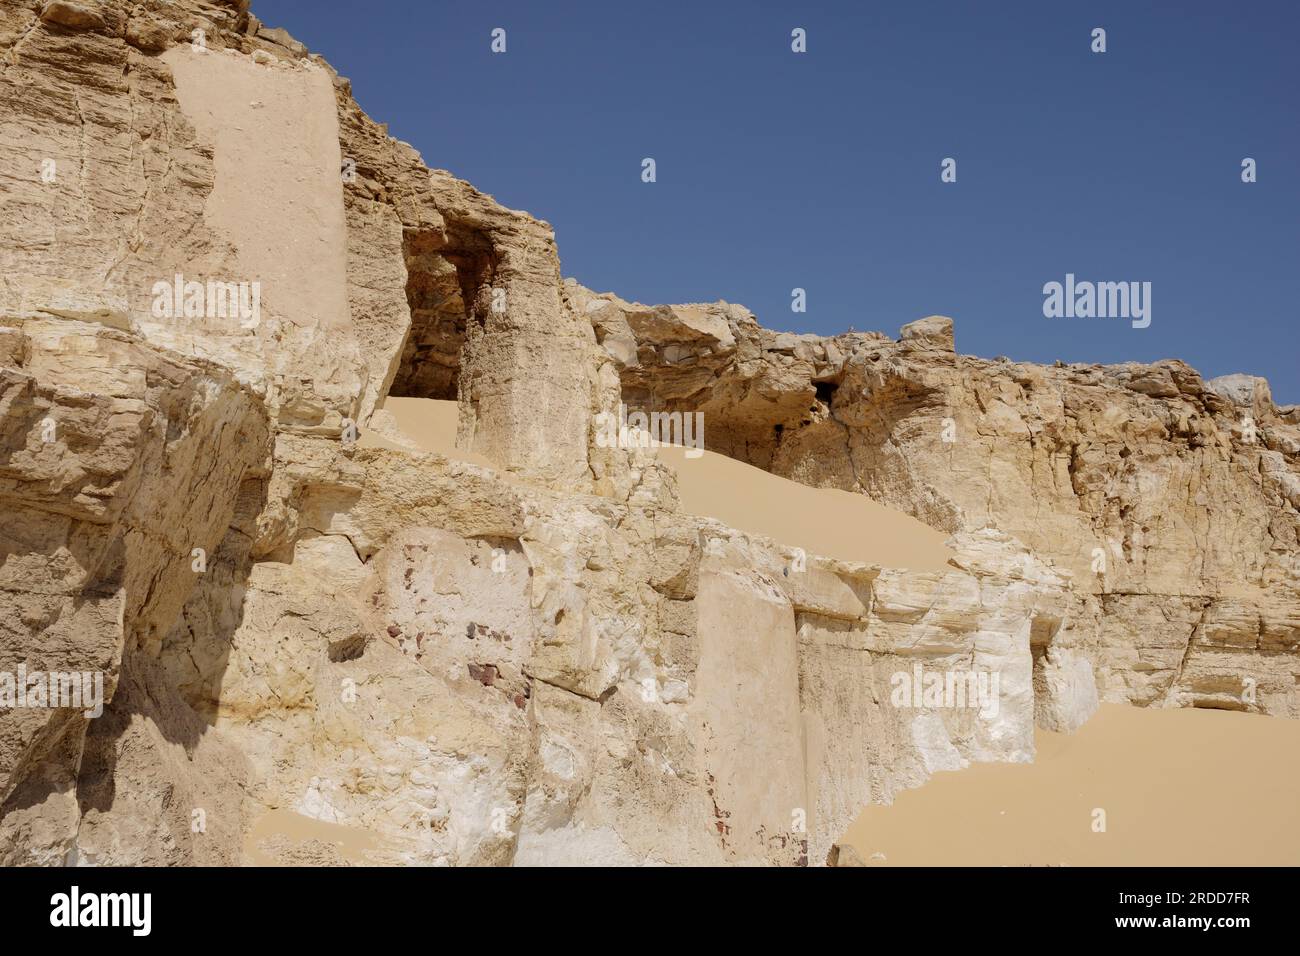 Views of the Meir tombs near the village of Meir or Mayr in the Nile Valley near Asyut, Middle Egypt Stock Photo